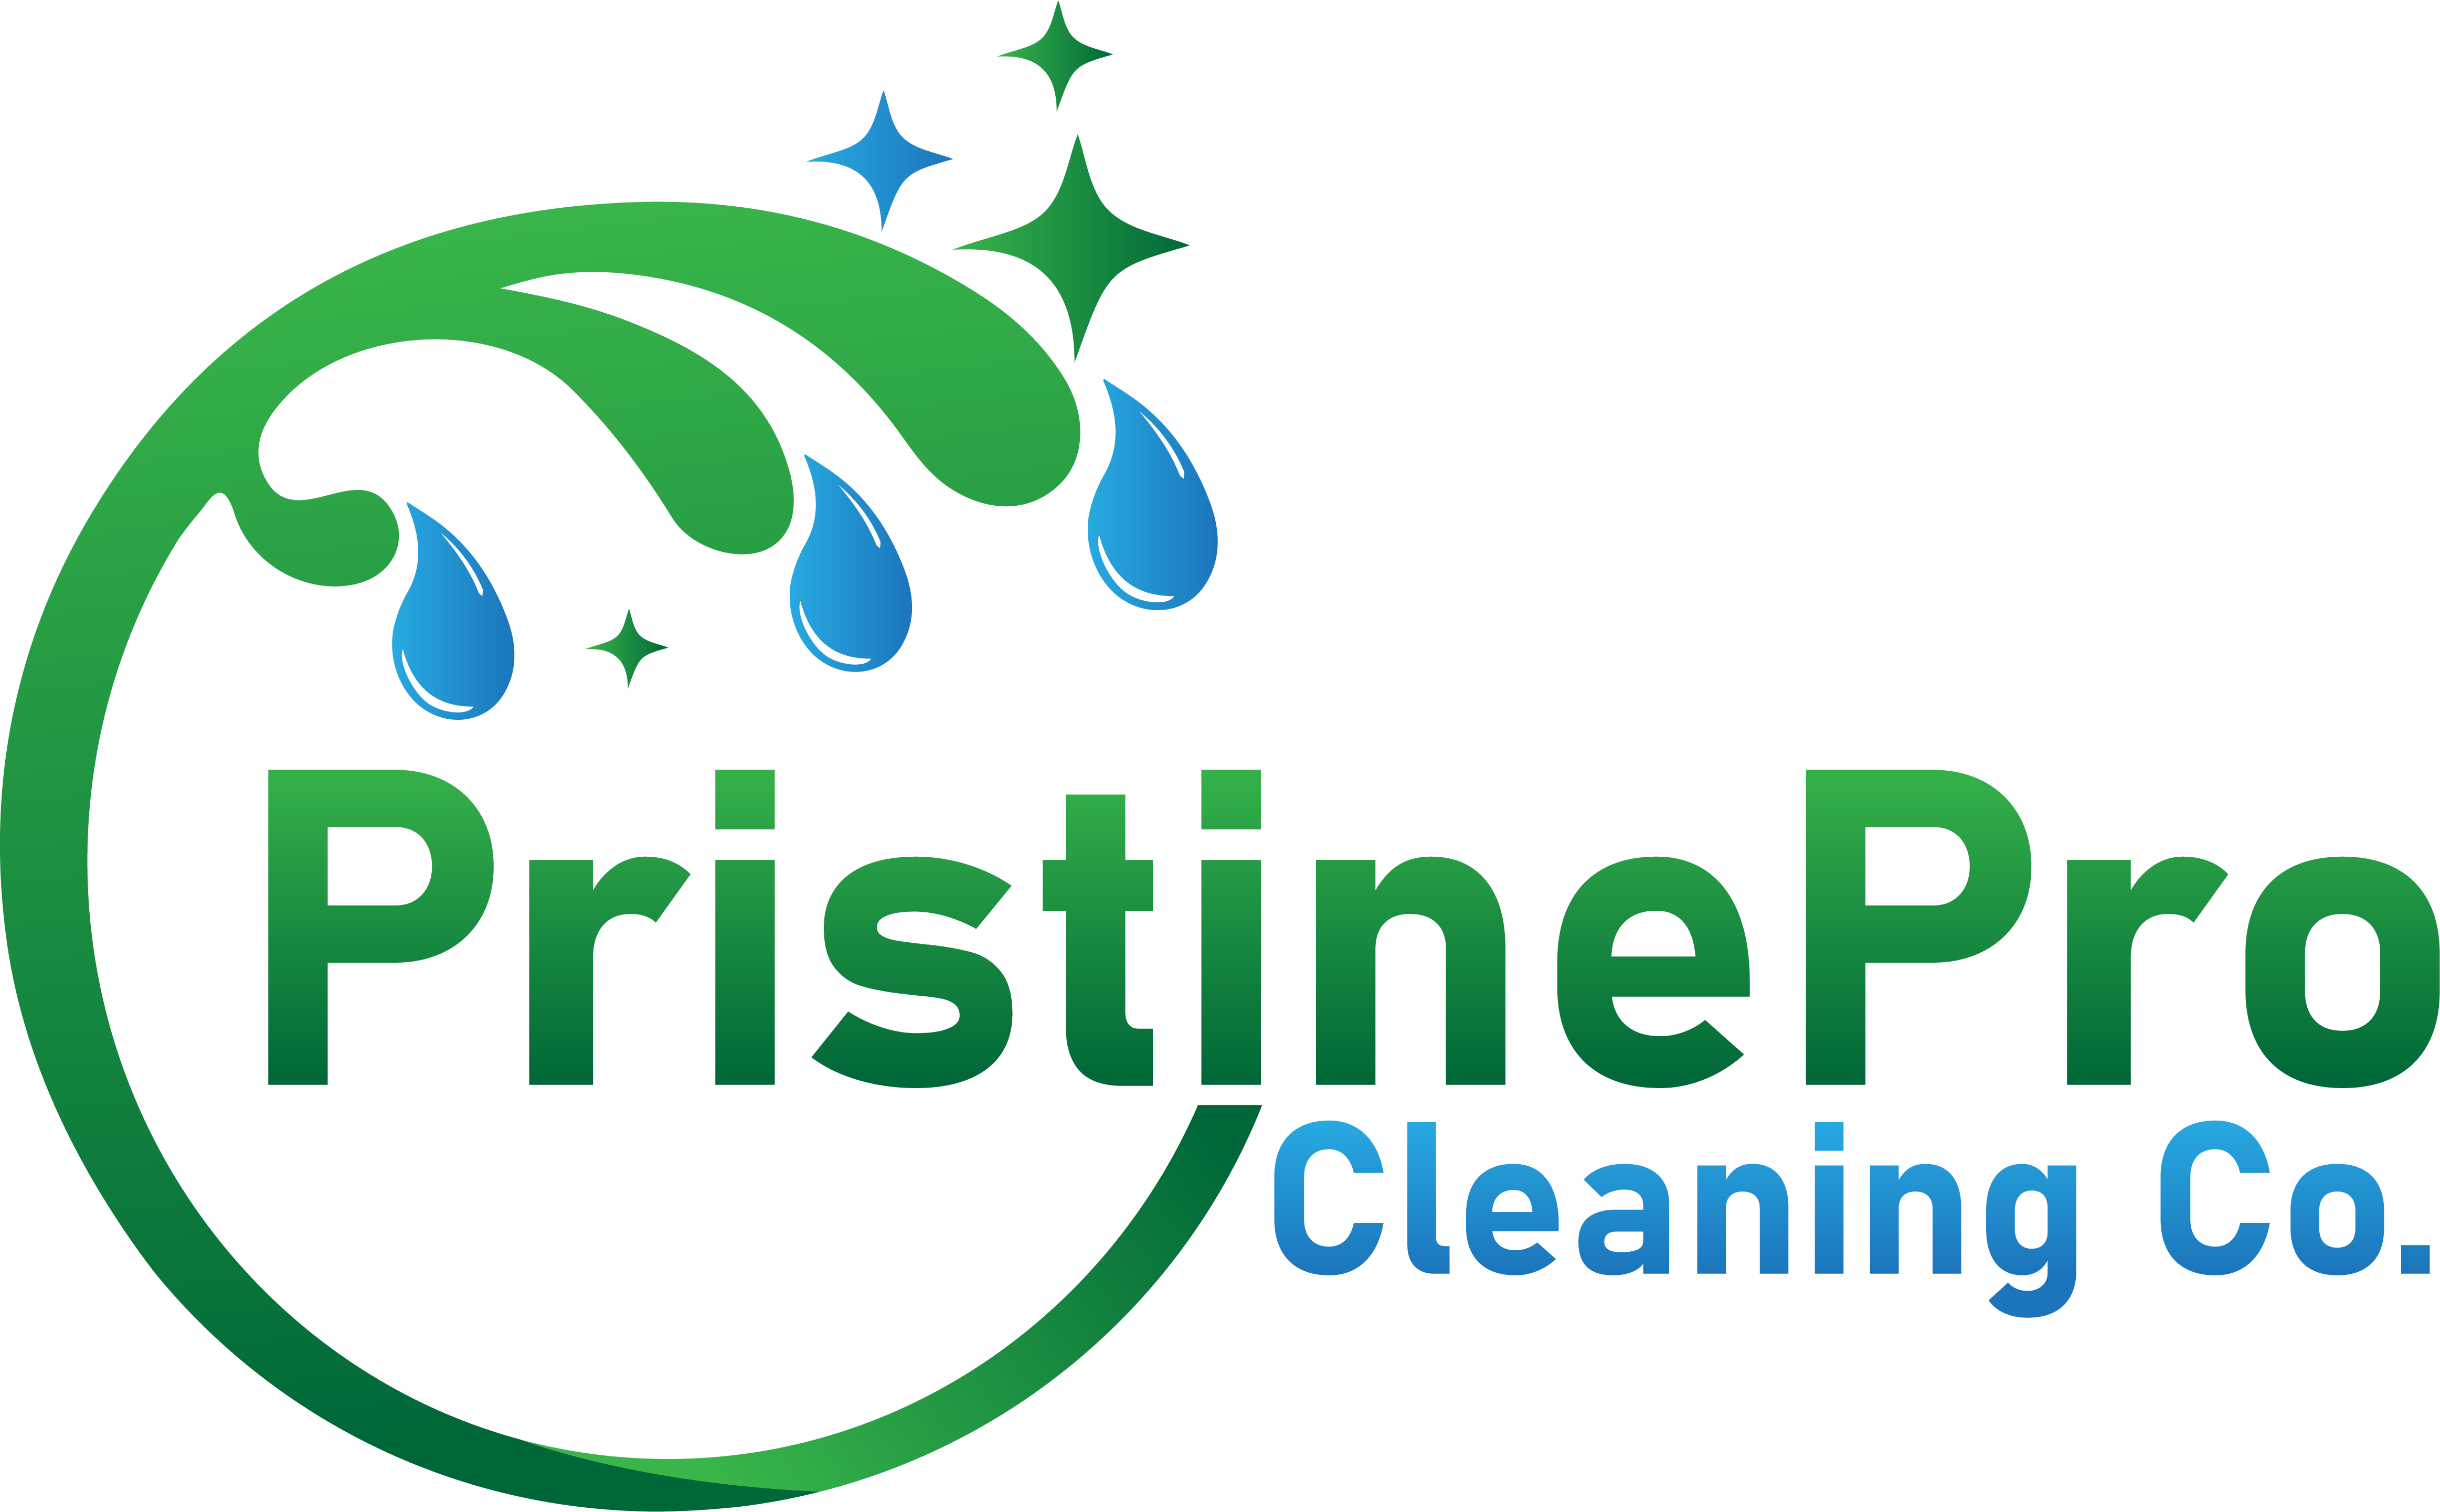 Pristine Pro Cleaning Co.